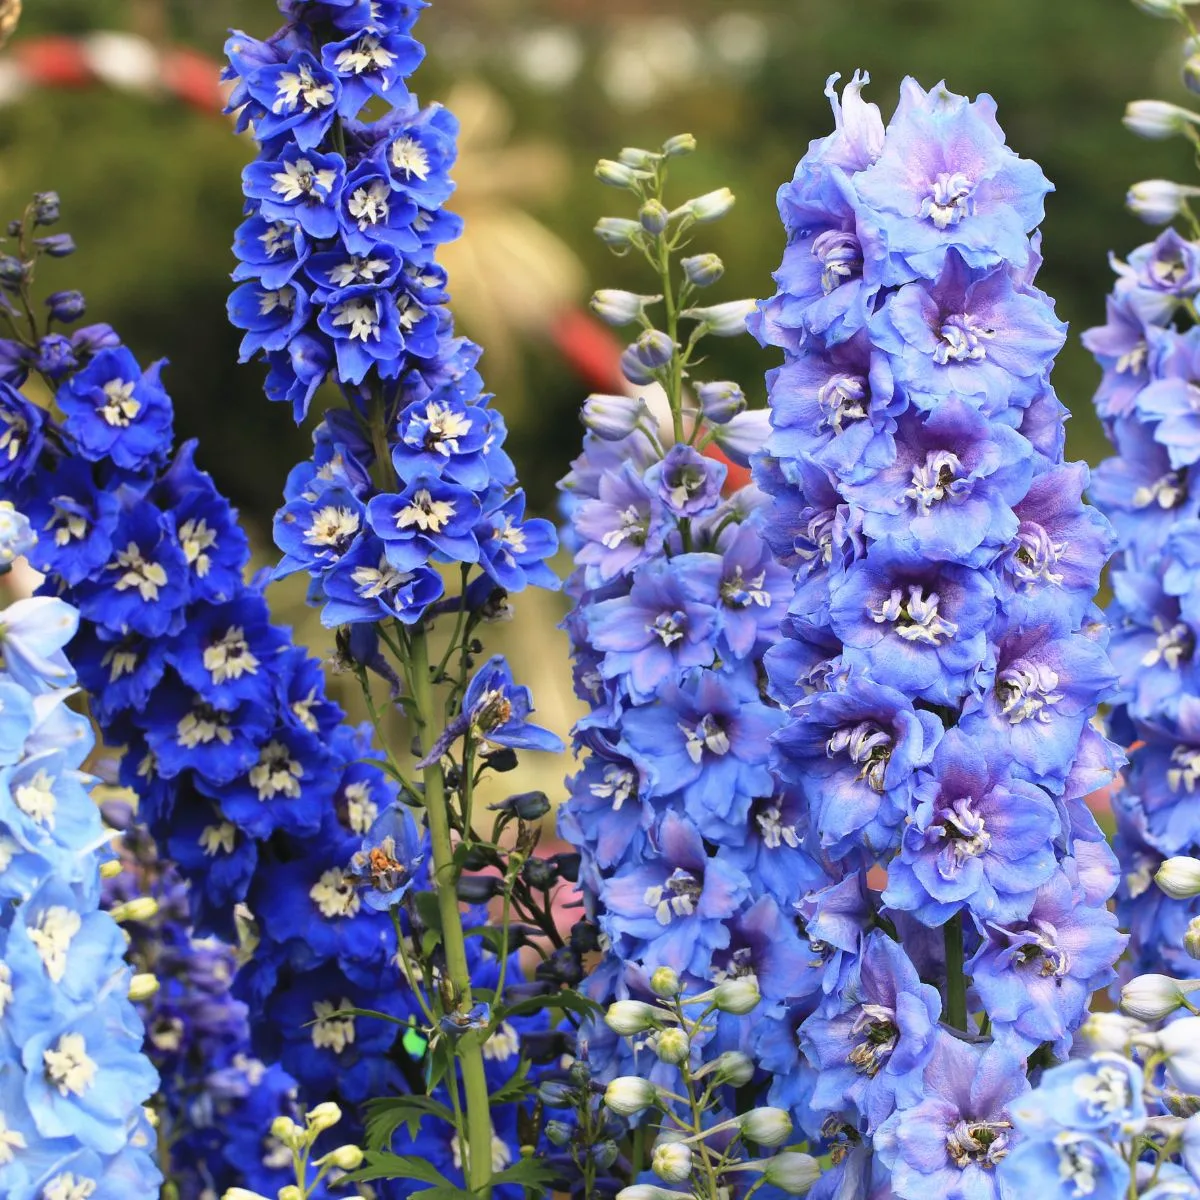 Delphinium flowers in different shades of blue. 